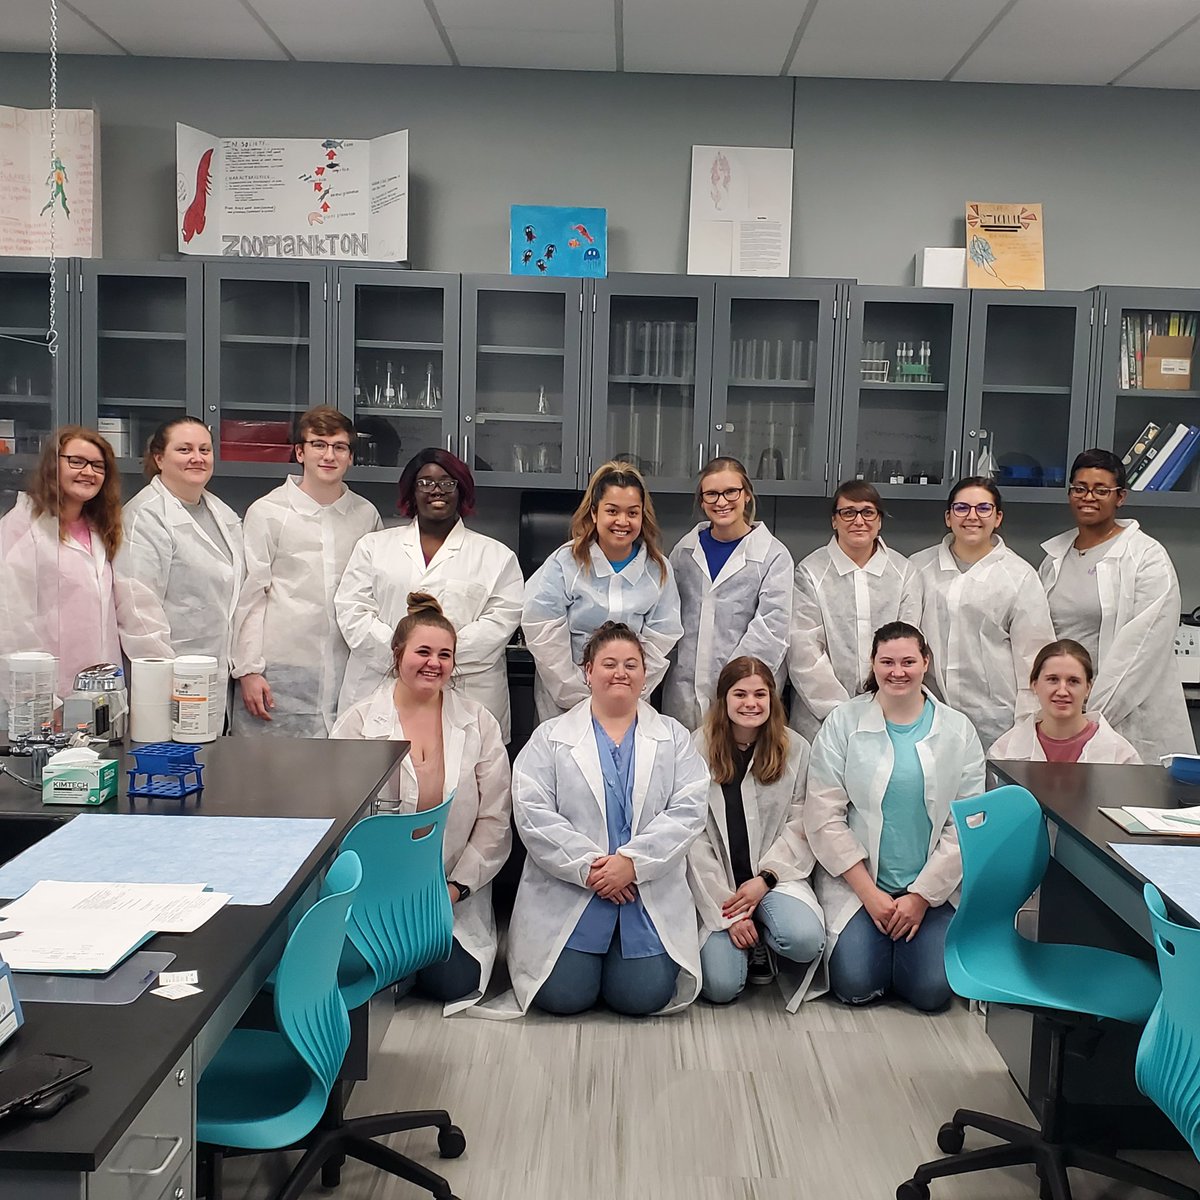 Happy Medical Laboratory Professionals week from the future graduates of Southcentral Kentucky Community and Technical College SKYCTC MLT! #ASCPLabWeek23 #ASCLS #KSCLS #SKYCTC